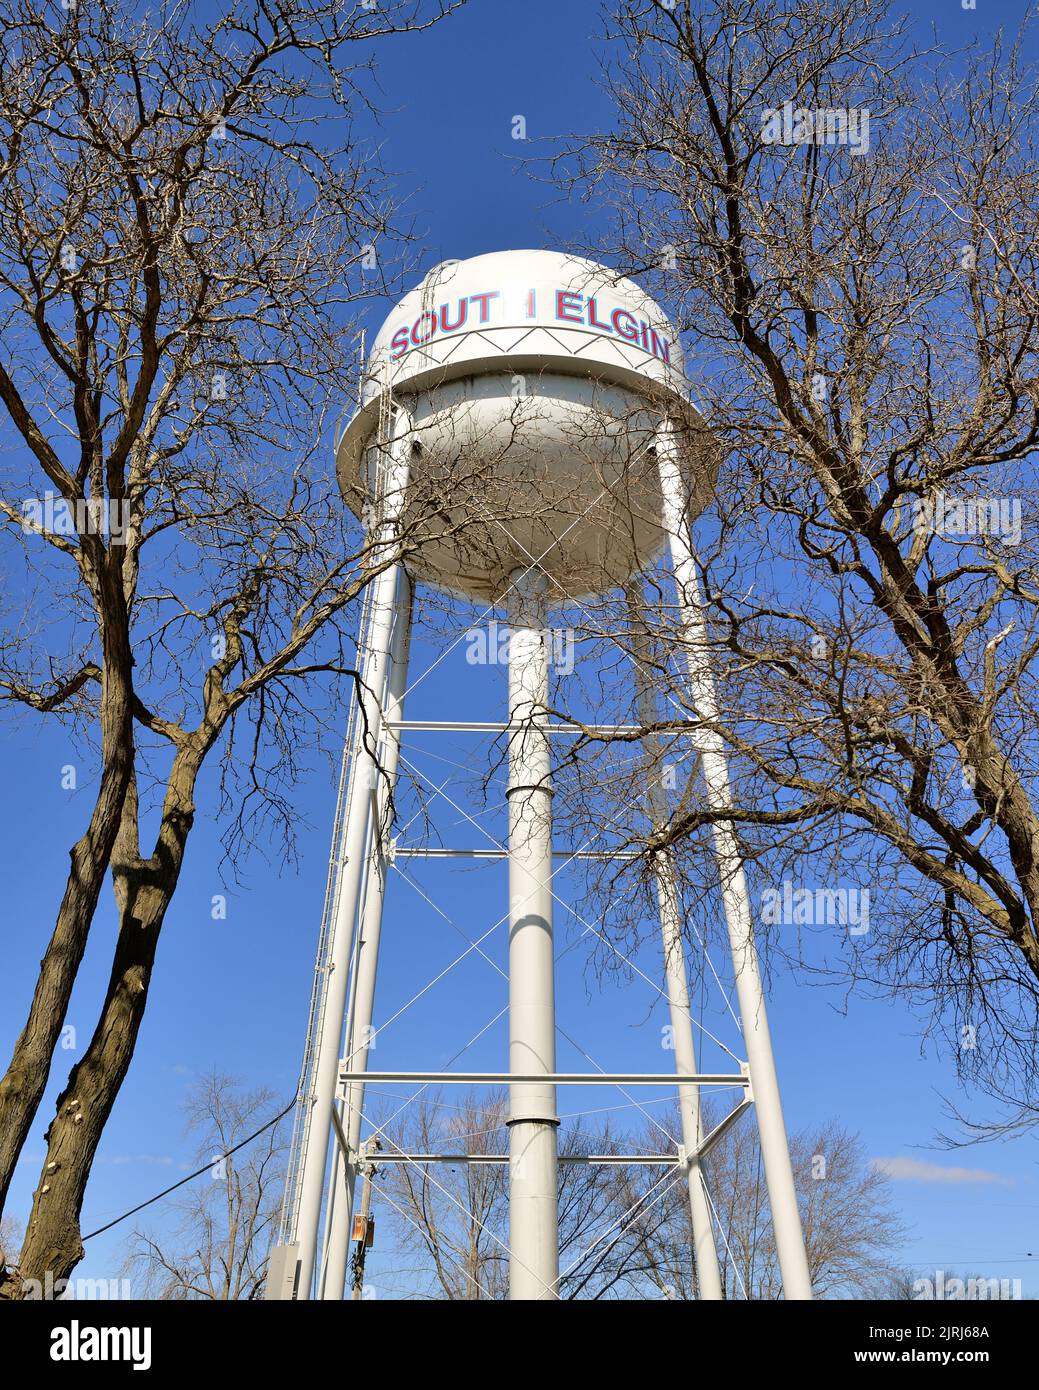 South Elgin, Illinois, USA. A community water tower in the suburbs of Chicago. Stock Photo